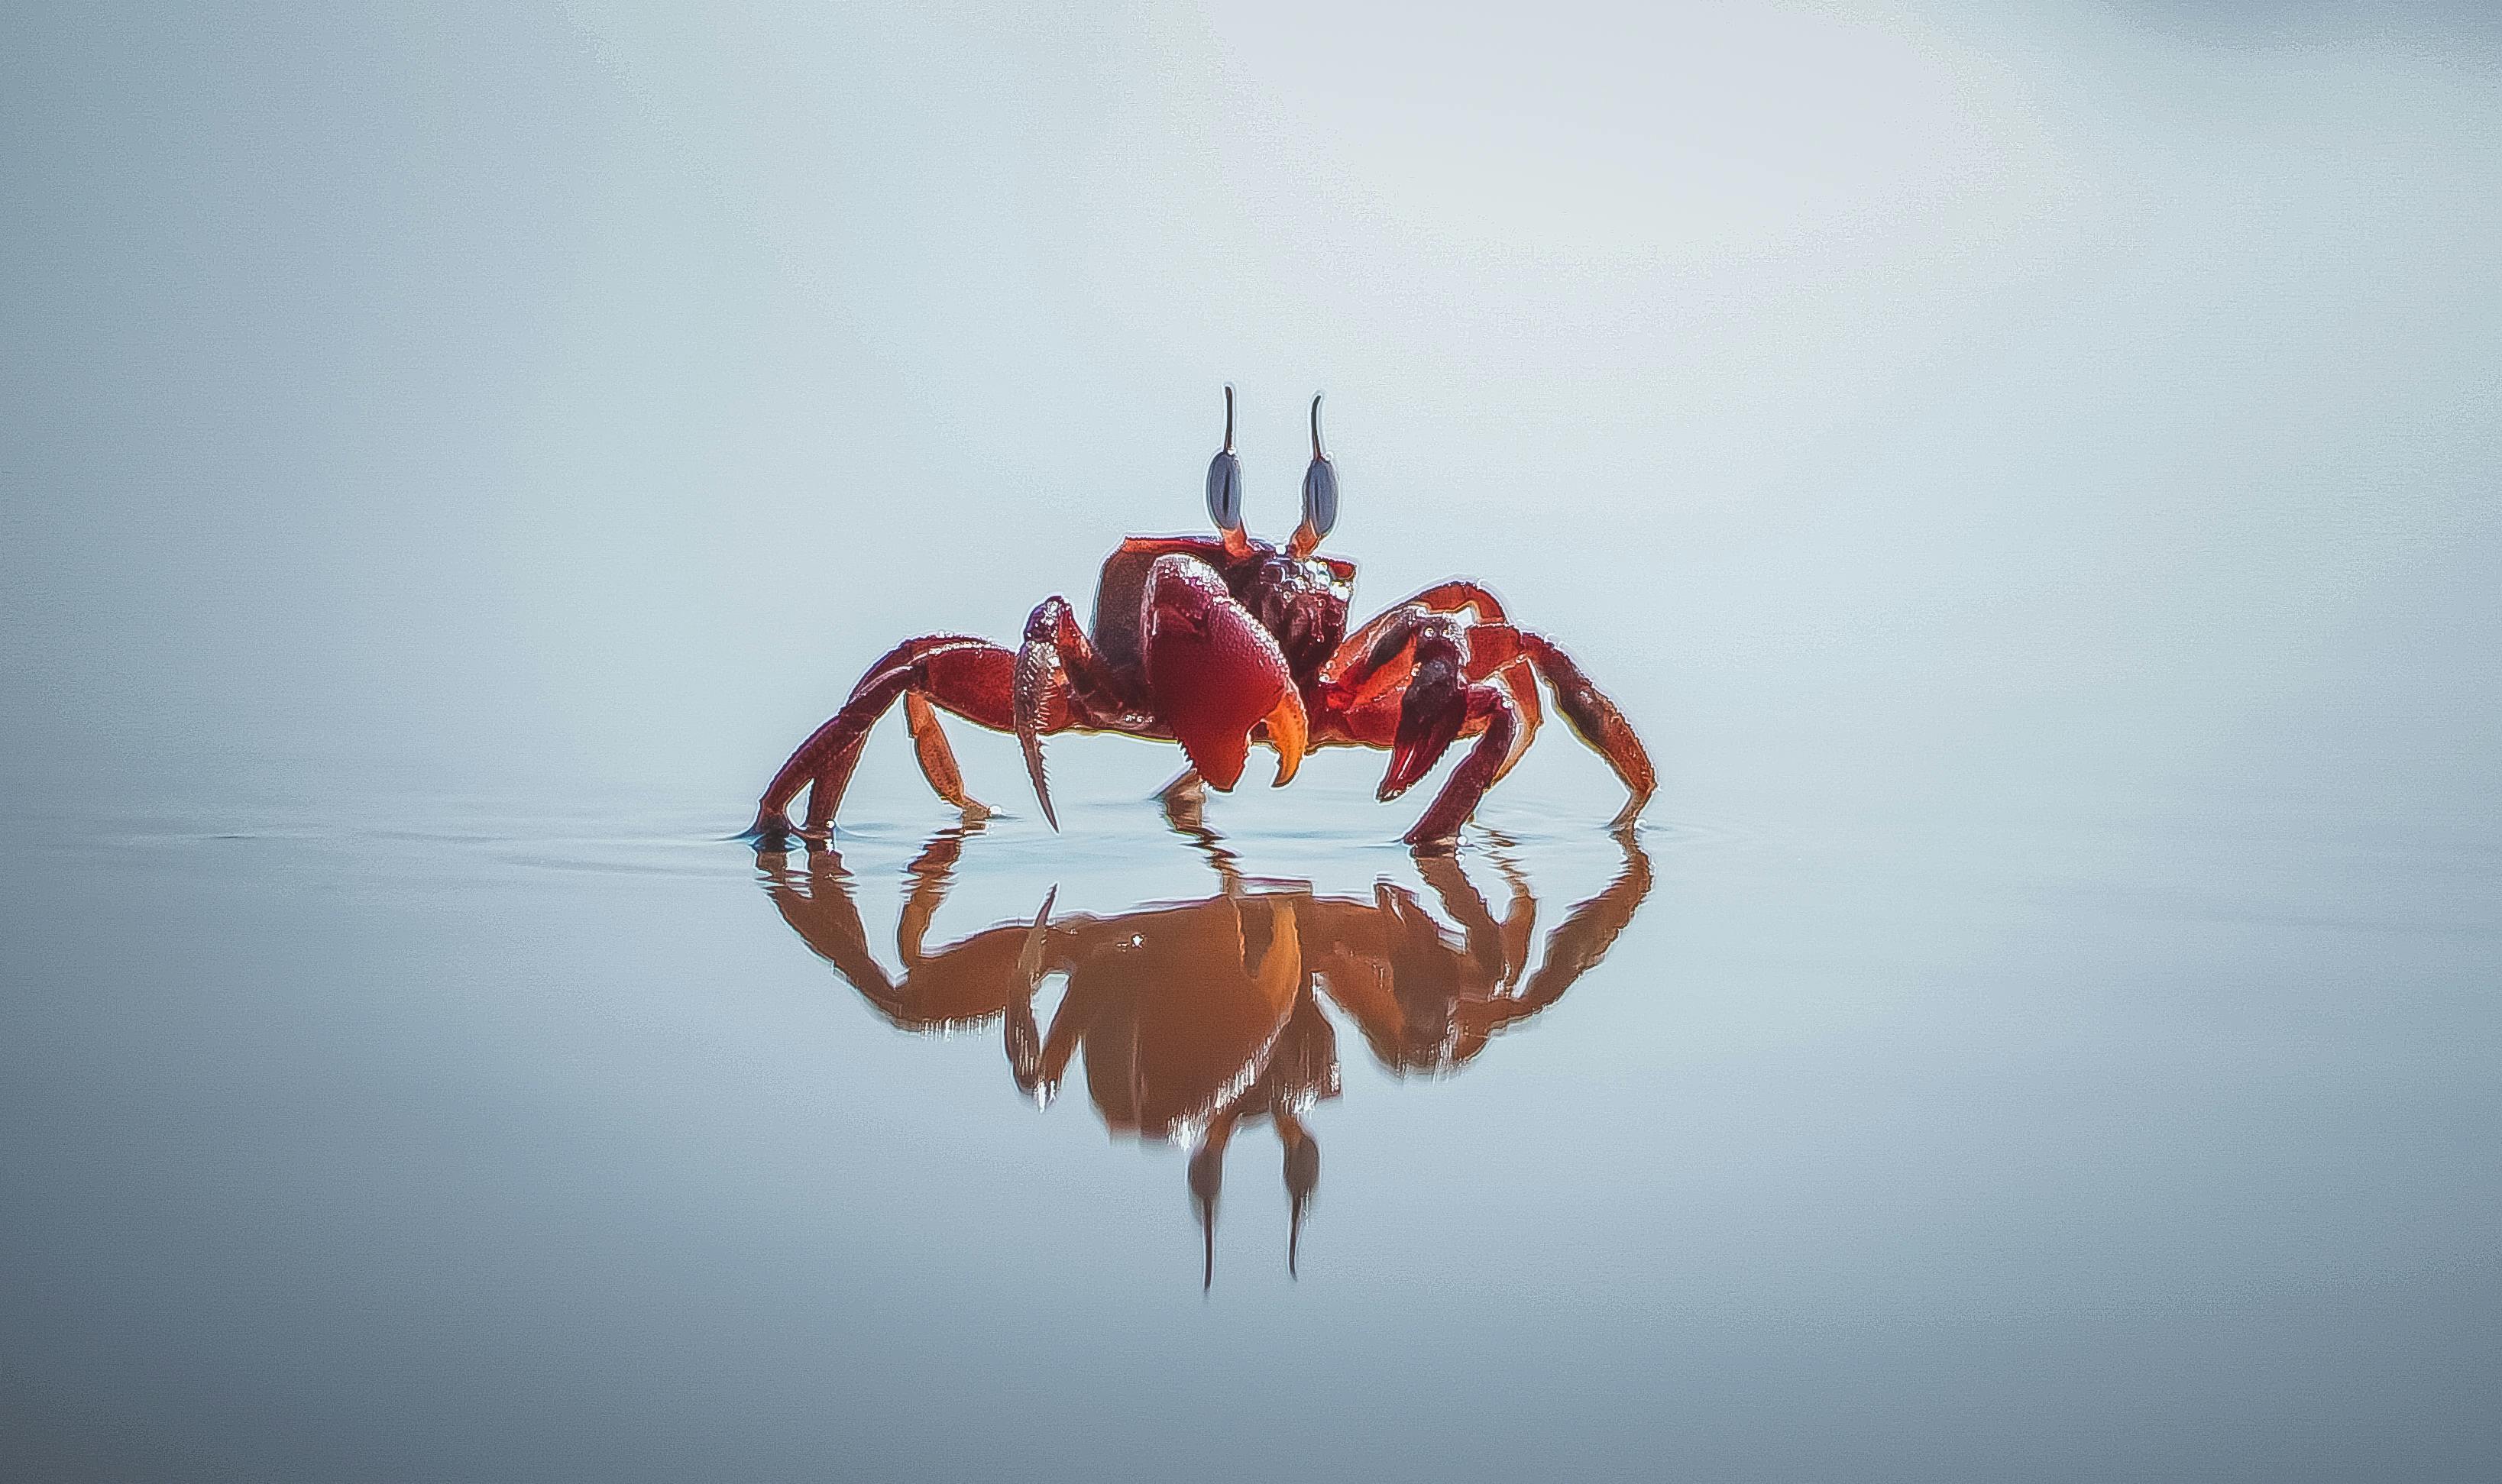 9+ Thousand Crawling Crab Royalty-Free Images, Stock Photos & Pictures